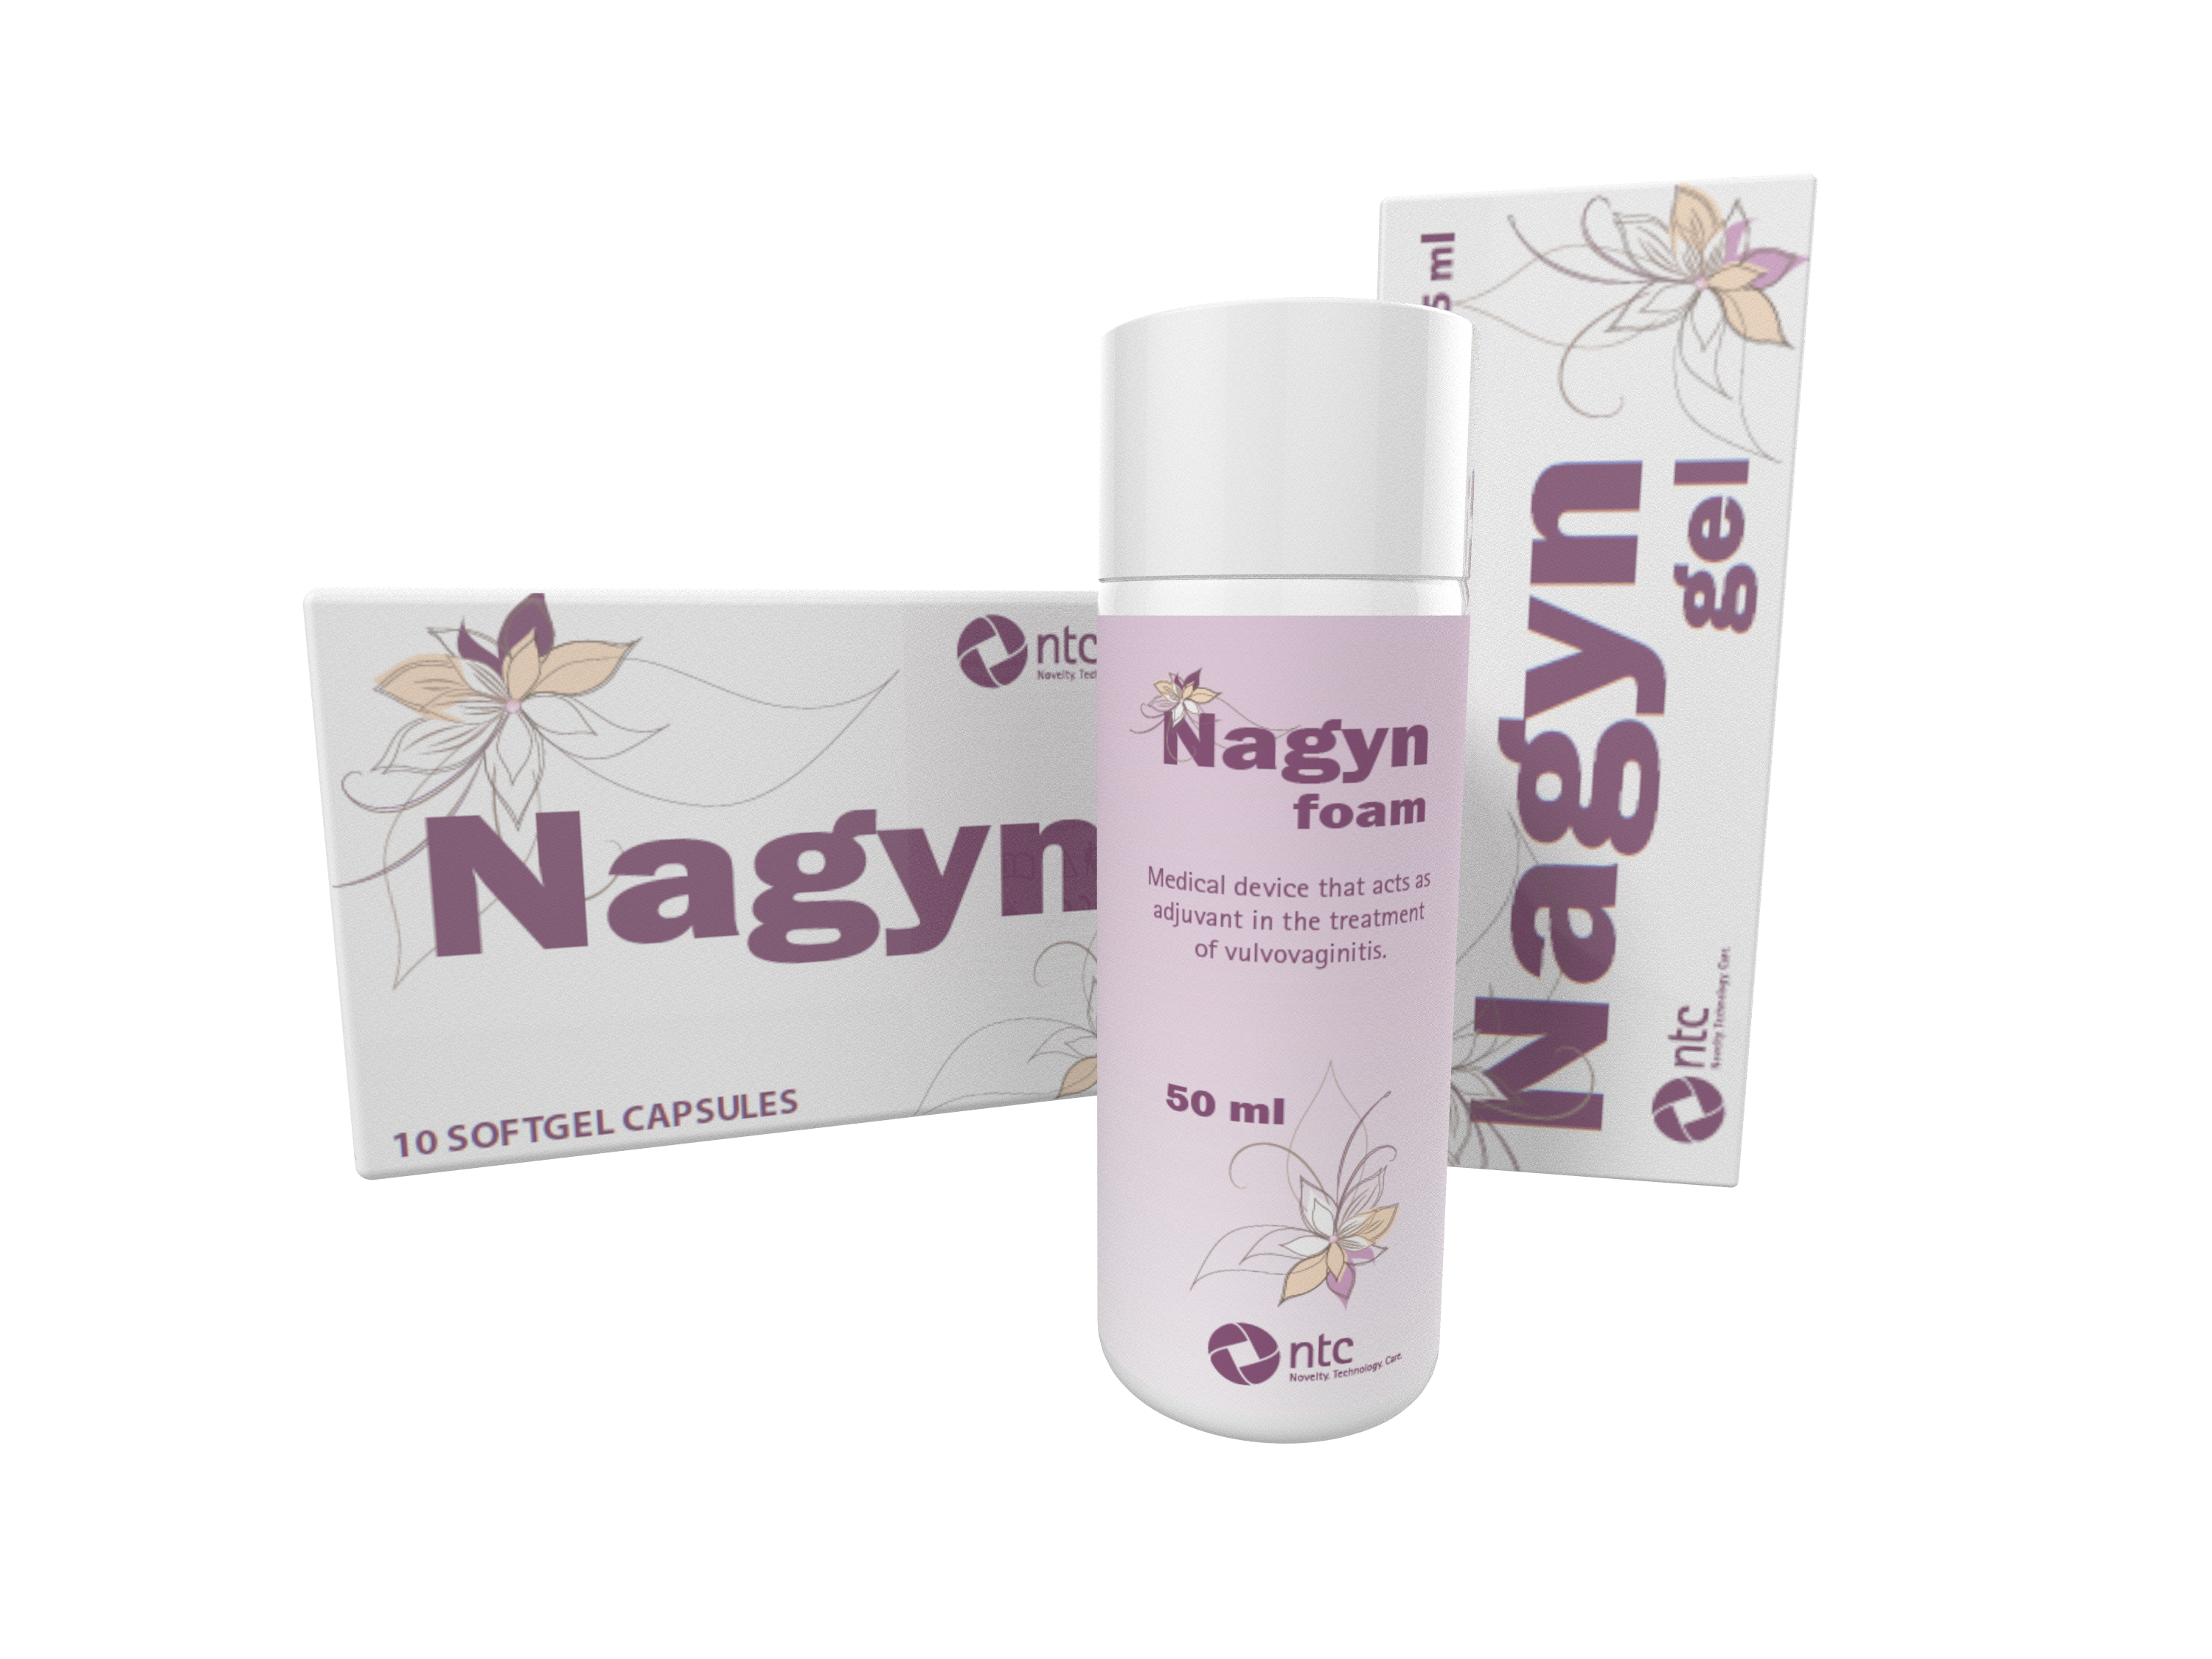 NAGYN - TiAb for vaginal infection prevention and treatment (Women’s Health - gynecology)